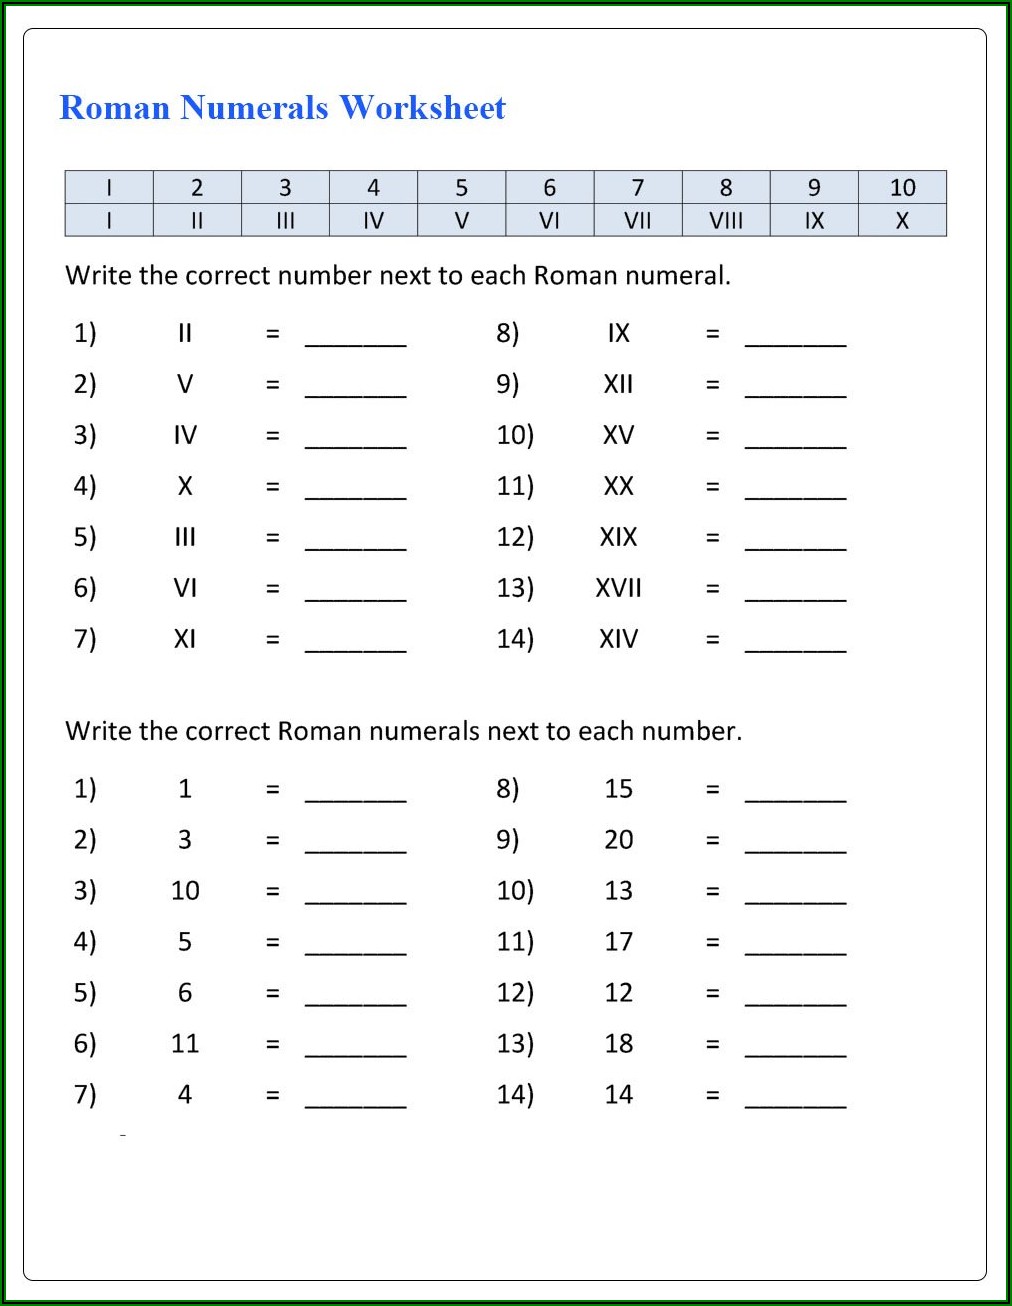 Roman Numerals Worksheet For Class 5